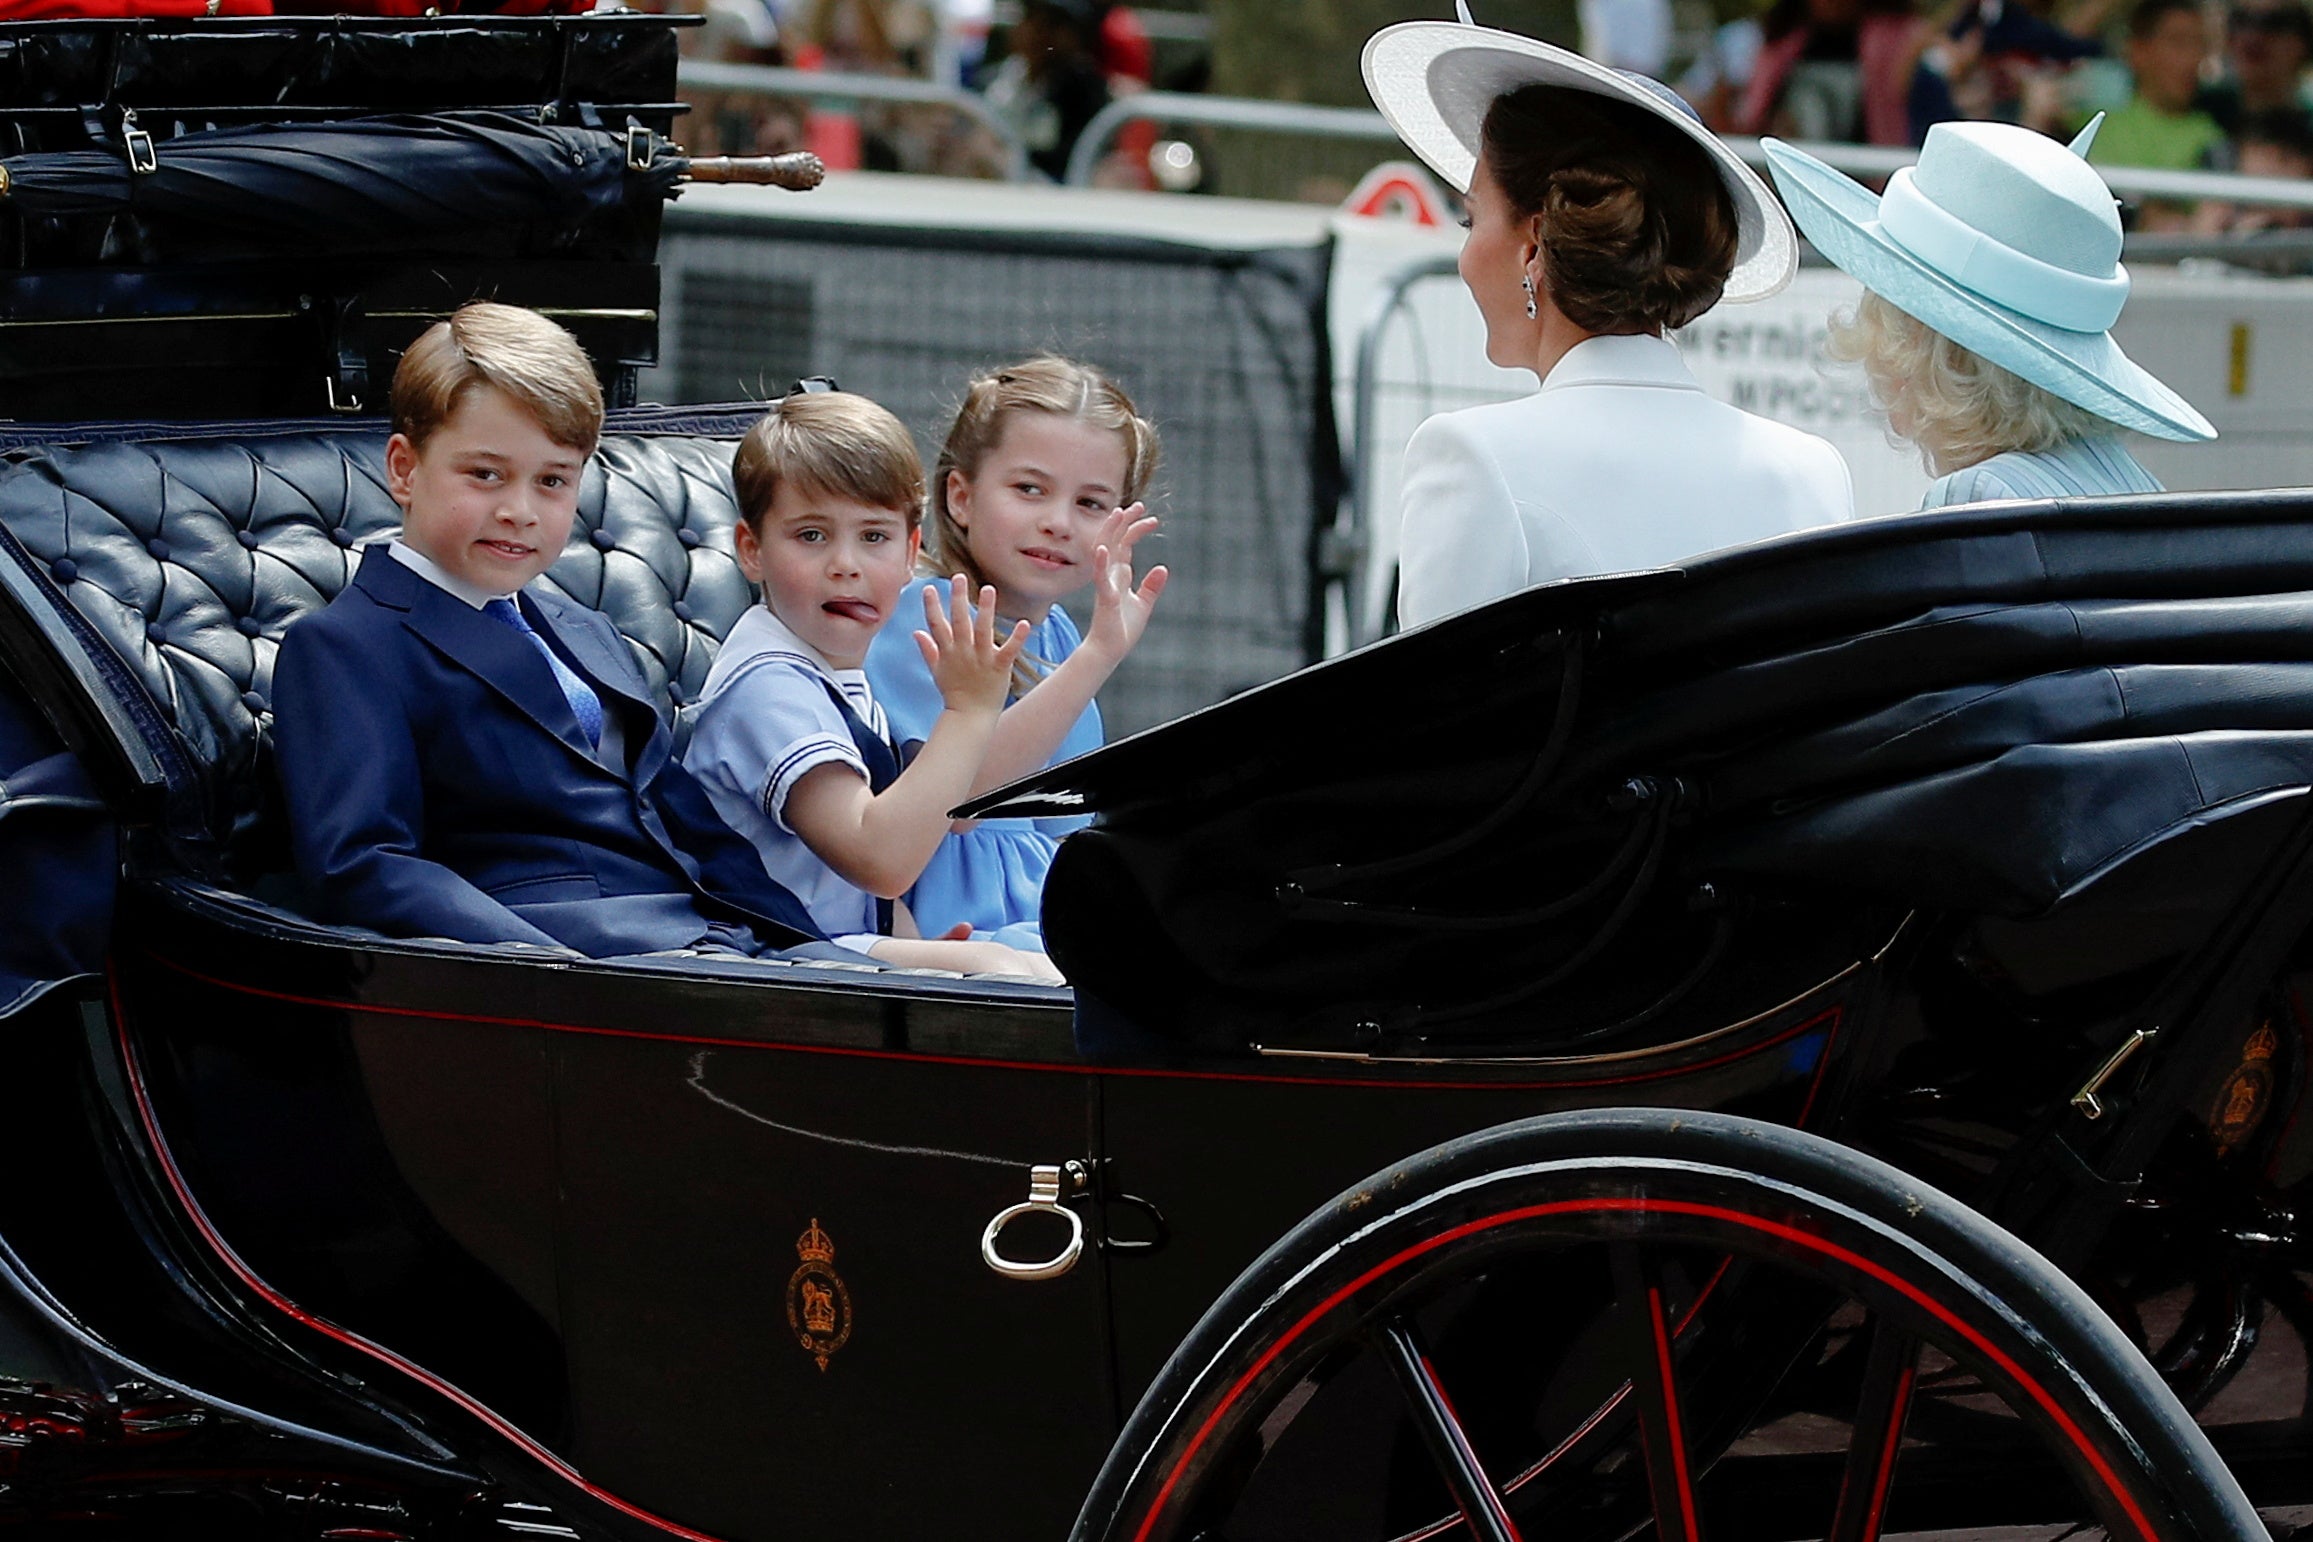 The Cambridge children joined the royal procession